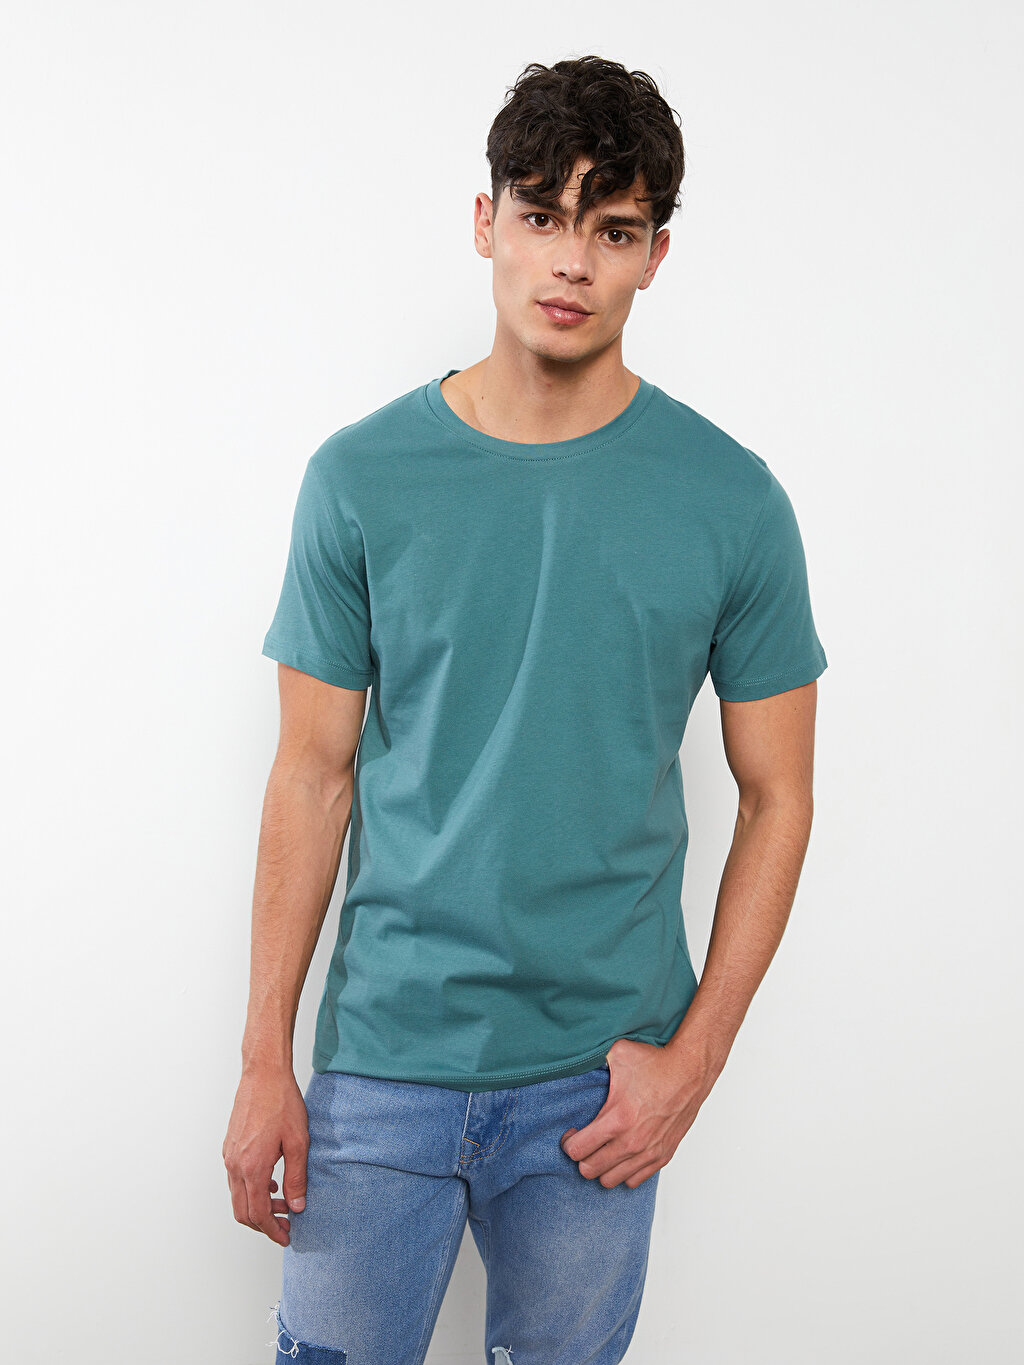 LCW CASUAL Crew Neck Short Sleeve Basic Combed Cotton Men's T 